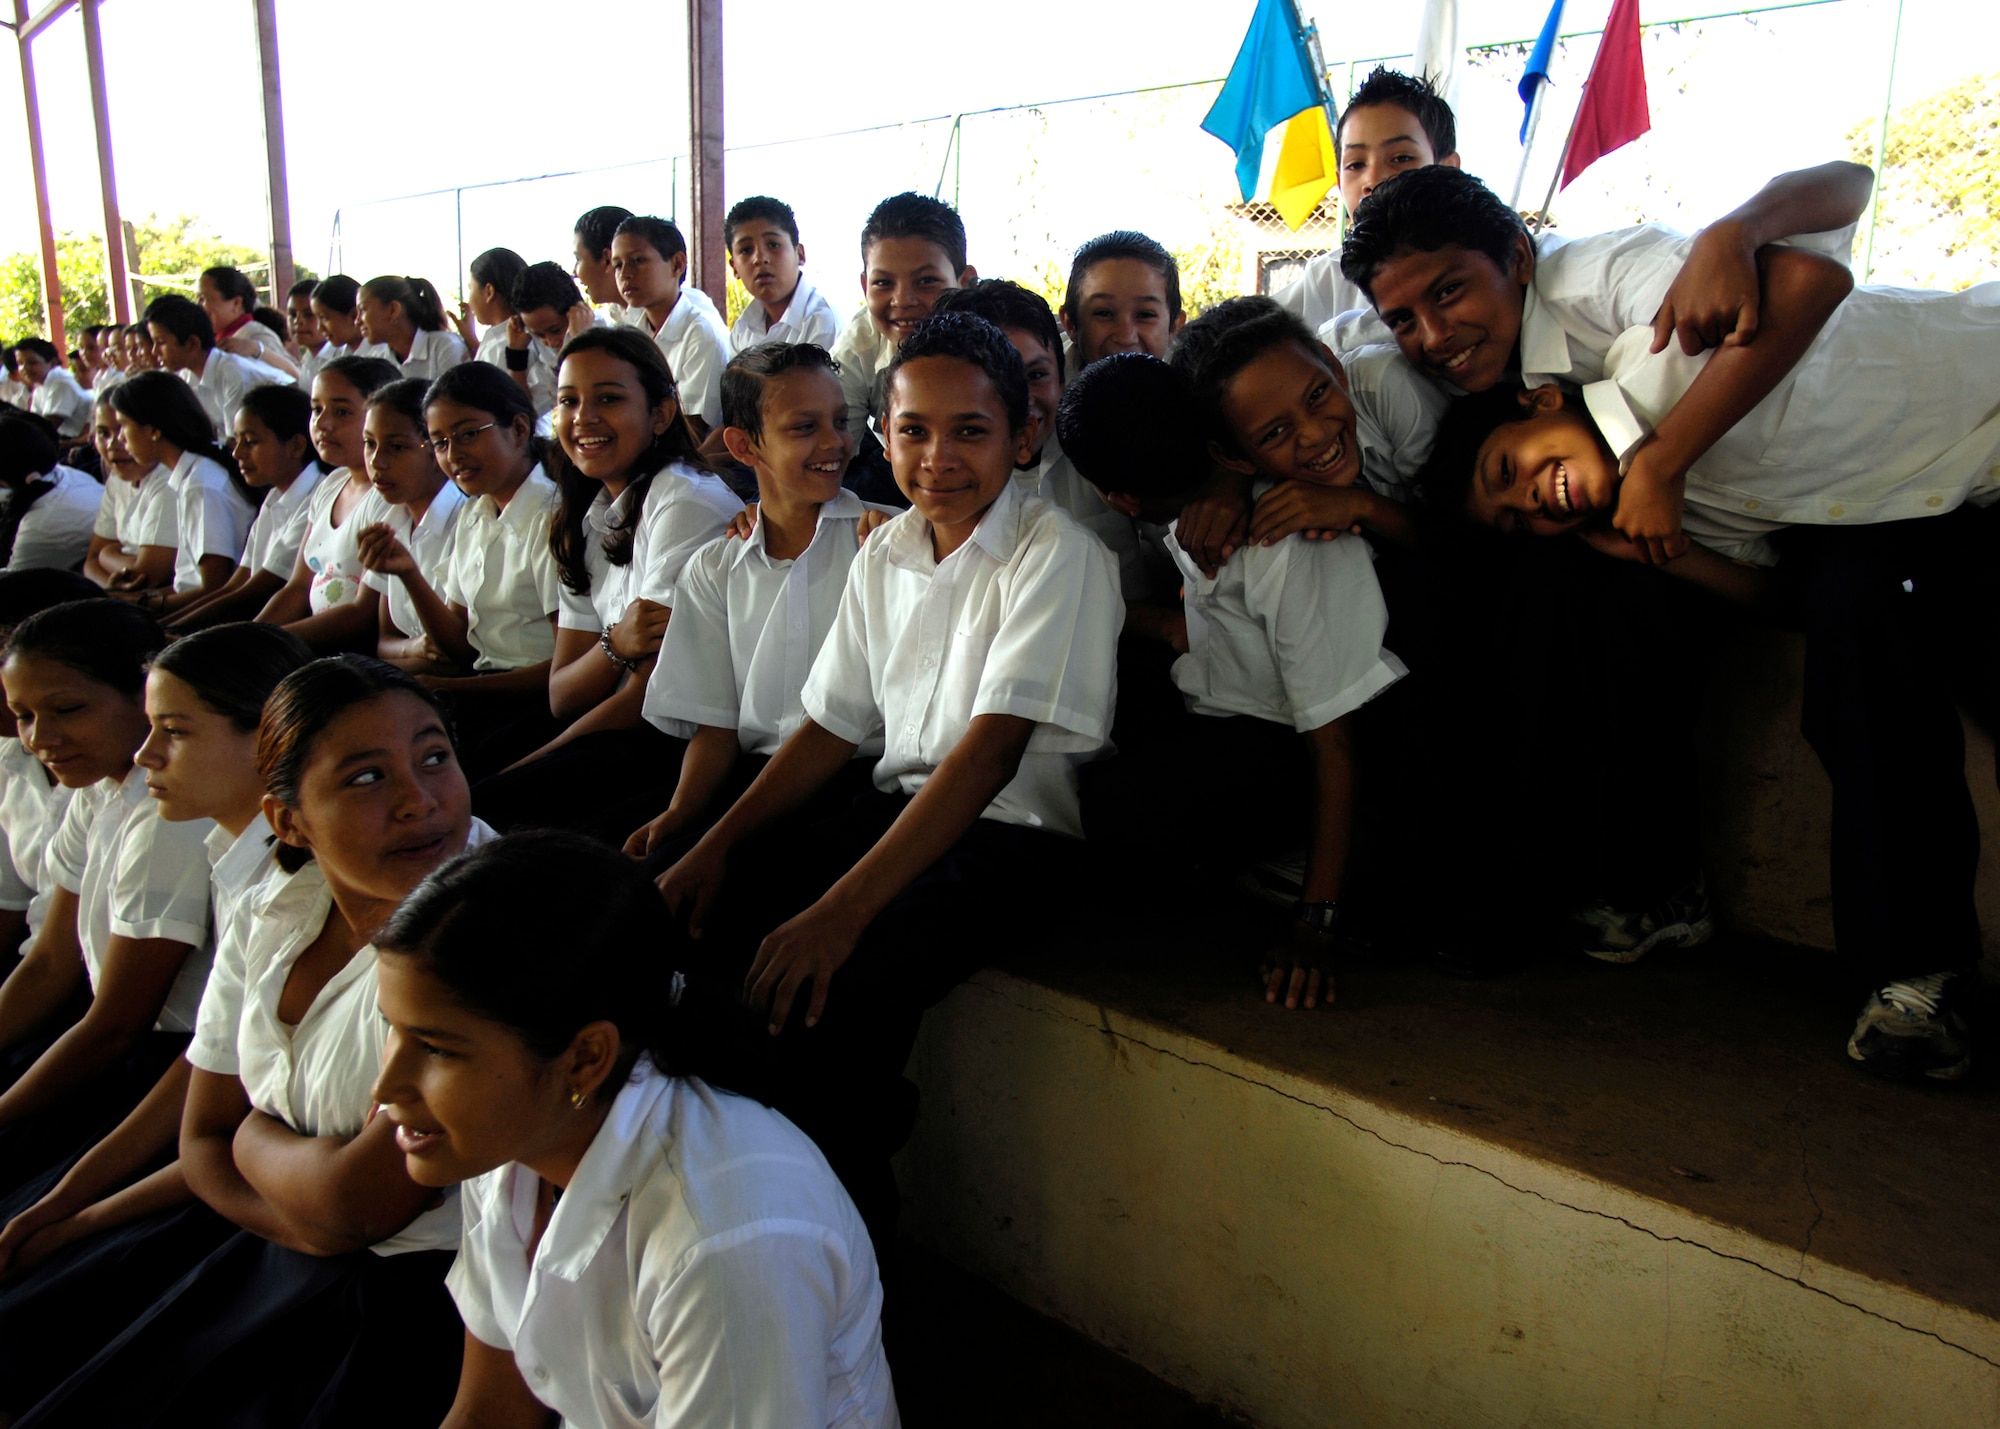 Resident school children of Santa Teresa watch as members of the 820th Expeditionary Red Horse Squadron, as well as Nicaraguan military and government officials, participate Feb. 15 in the opening ceremonies of New Horizons-Nicaragua 2007. New Horizons-Nicaragua 2007 is a $7.25 million United States and Nicaraguan military humanitarian and training exercise that is providing a new school and medical clinic to the Nicaraguan people. U.S. military members will also administer free health to Nicaraguans and free veterinary care to animals. (U.S. Air Force photo/Tech. Sgt. Kevin P. Milliken)